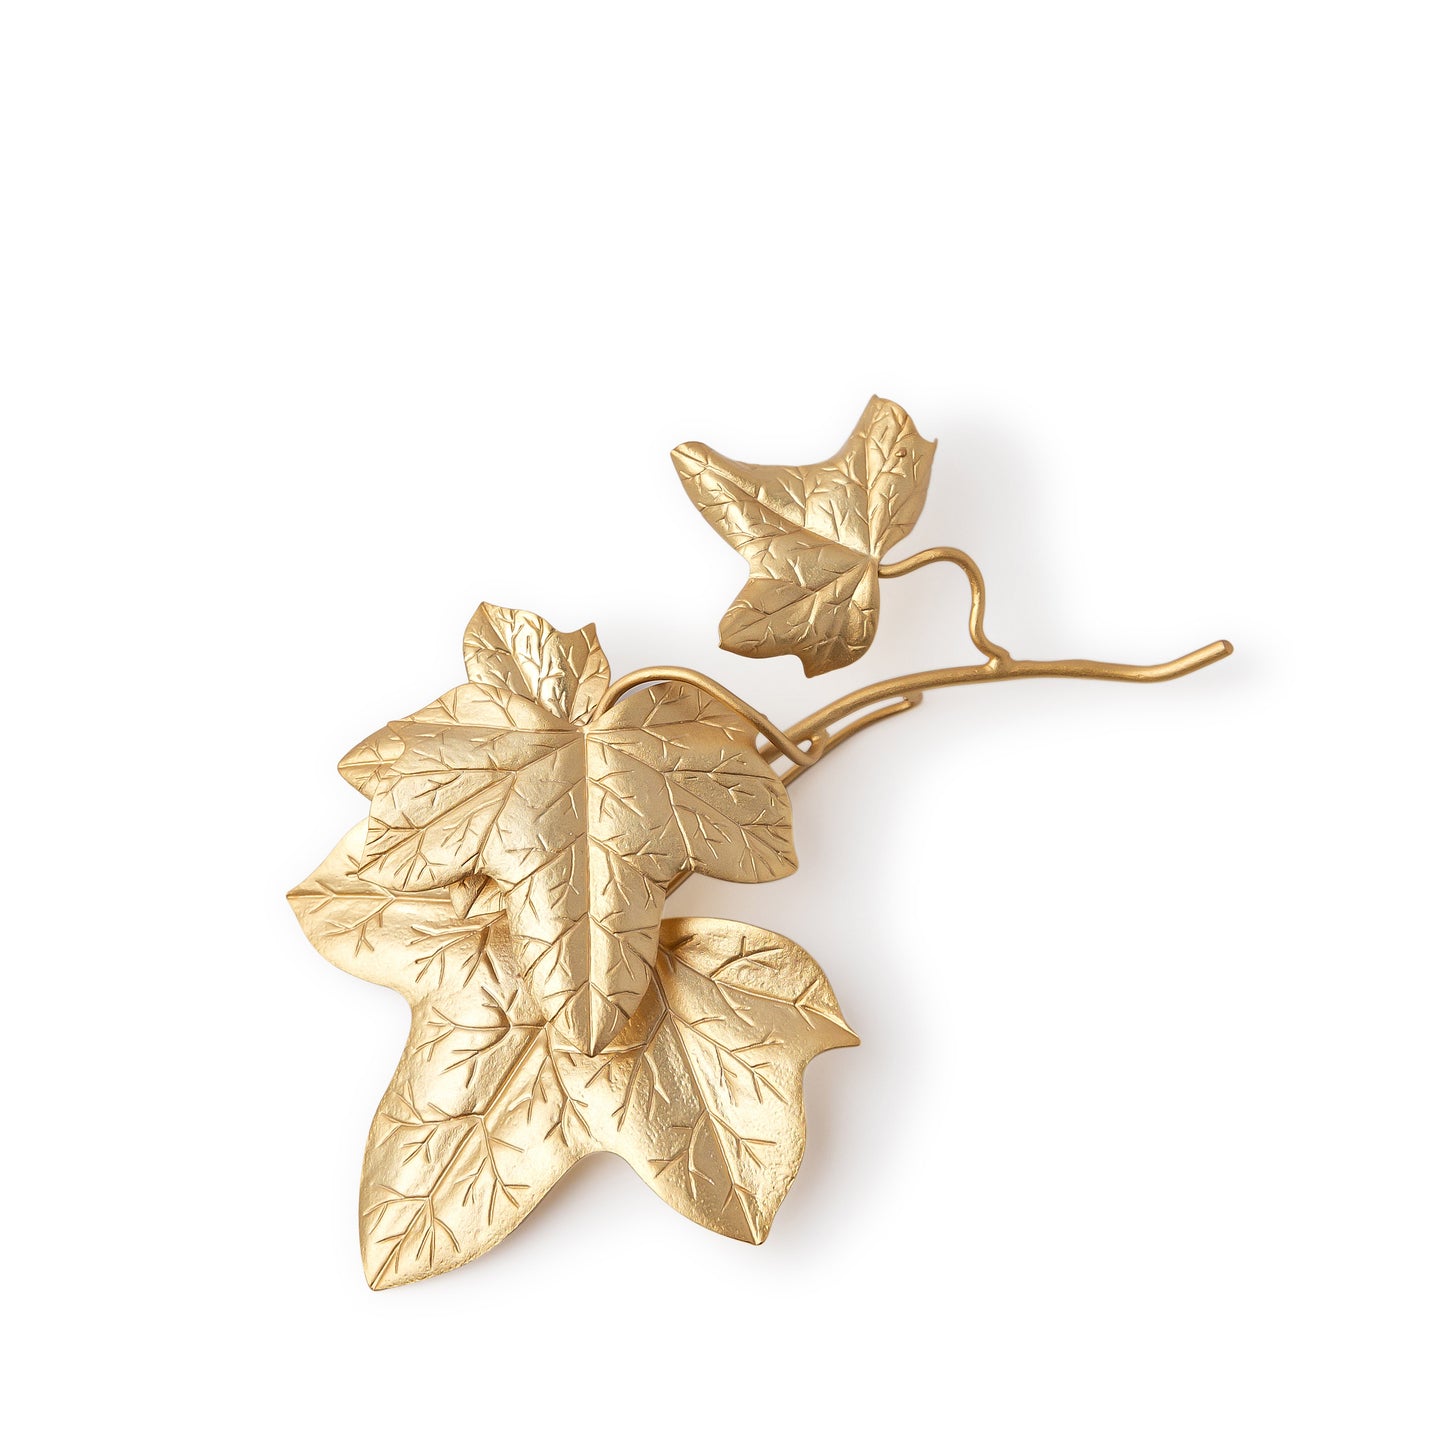 Ivy and Branches Brooch XL 24ct gold plating